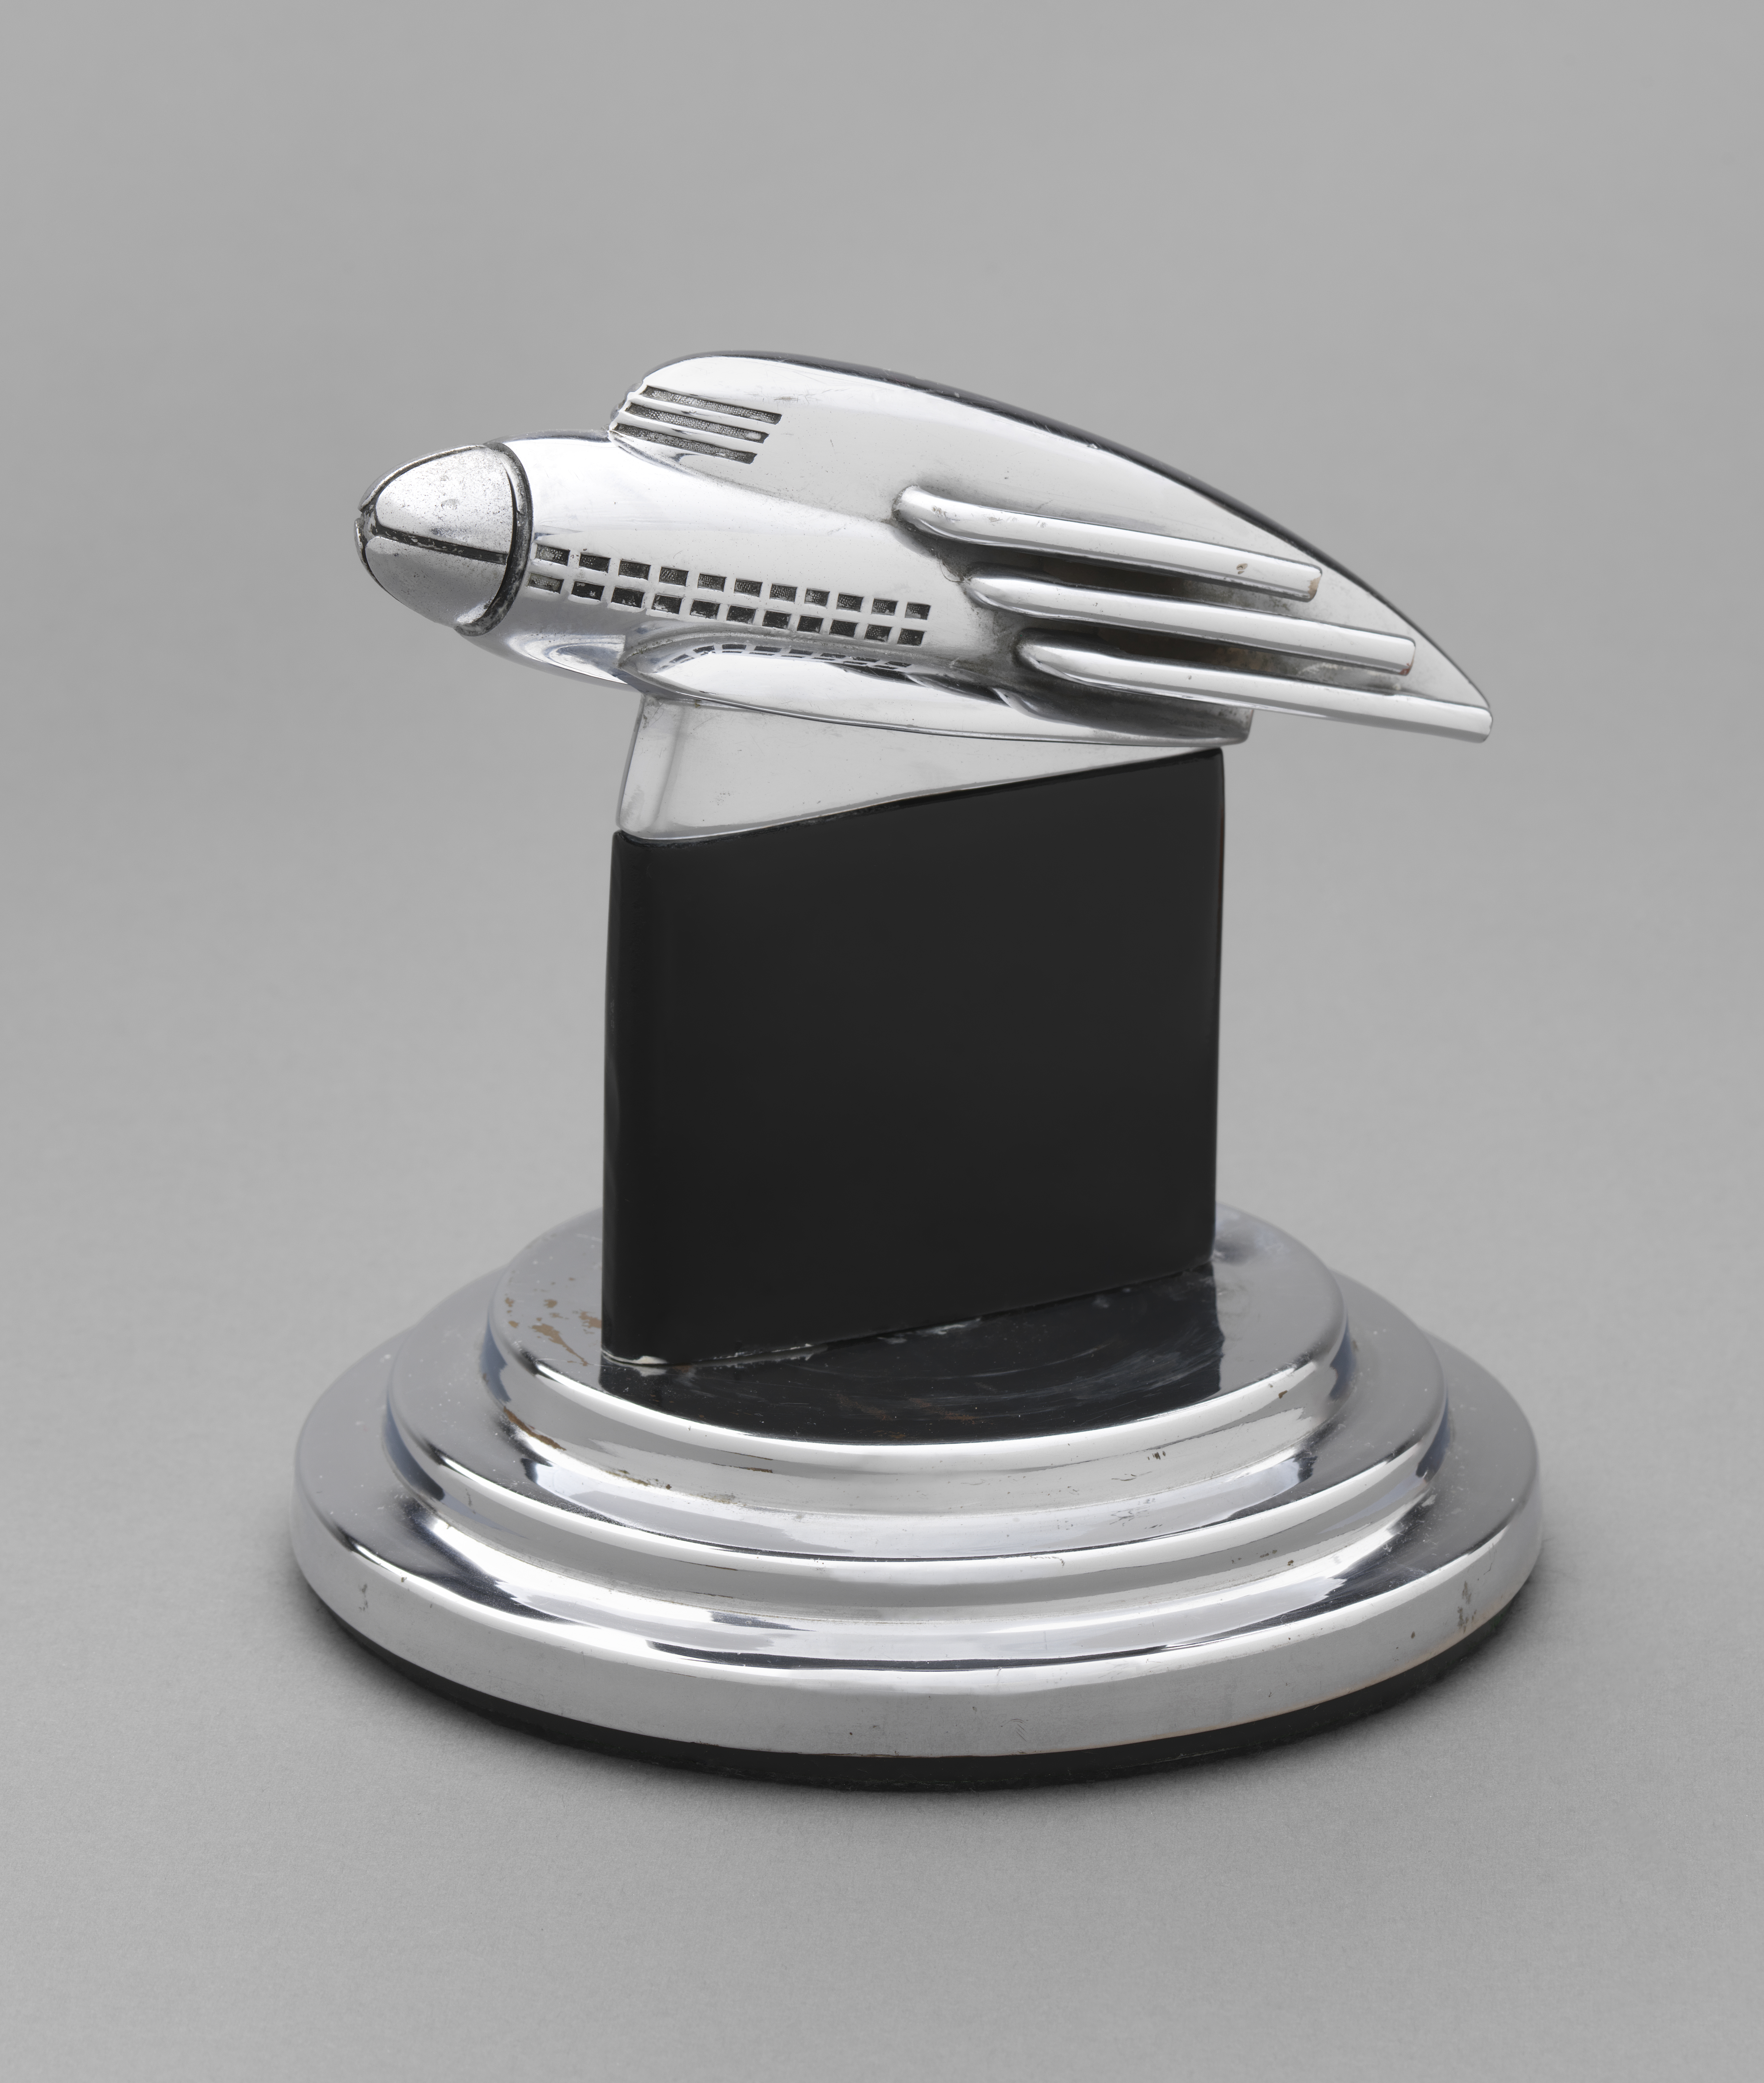 Sleek silver car ornament installed on a black and silver base